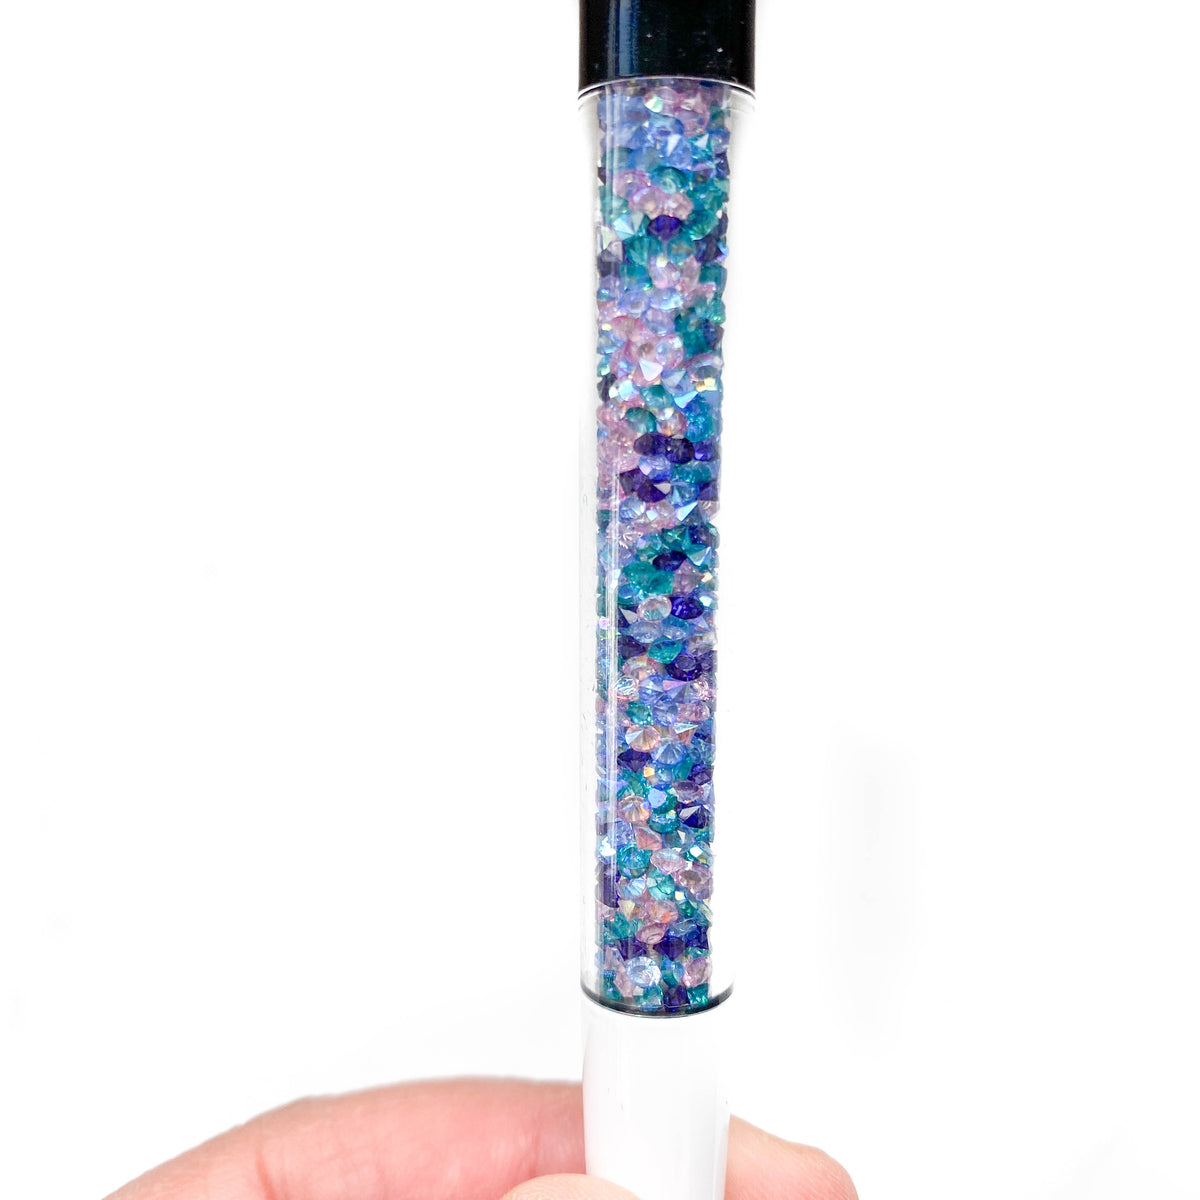 Stay Cool Imperfect Crystal VBPen | limited pen